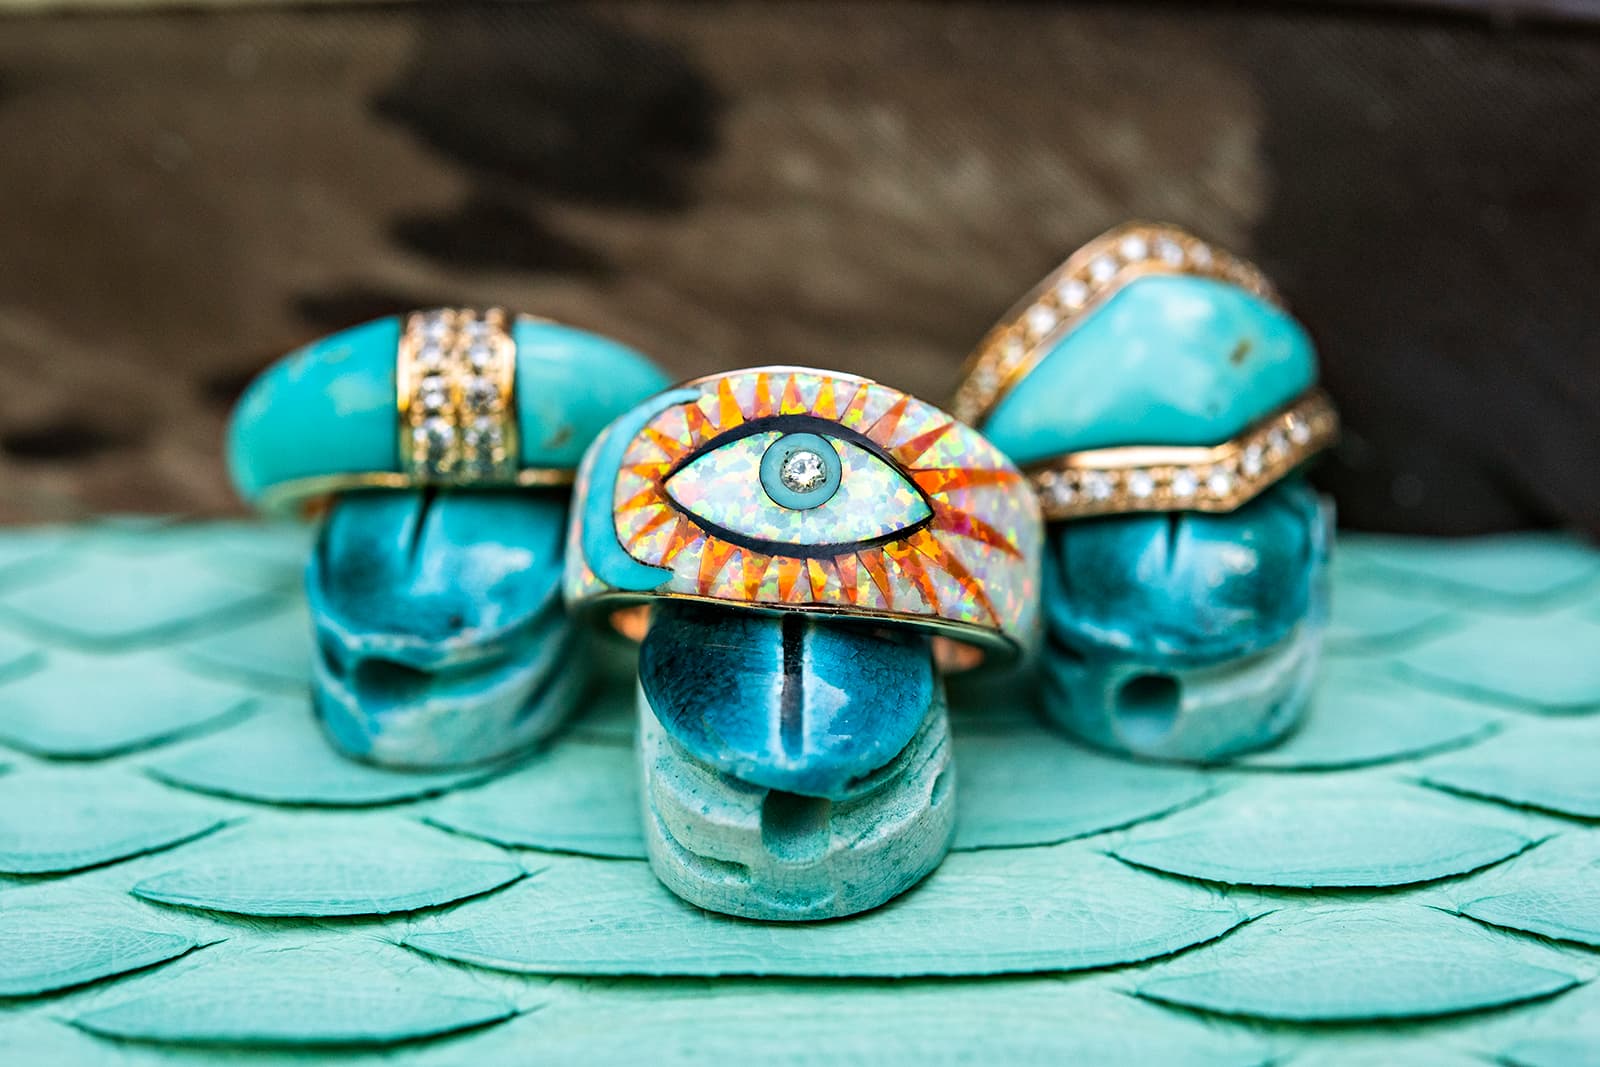 Jacquie Aiche believes that turquoise is a powerful healing stone that centres the spirit and allows positive energy to flow freely 